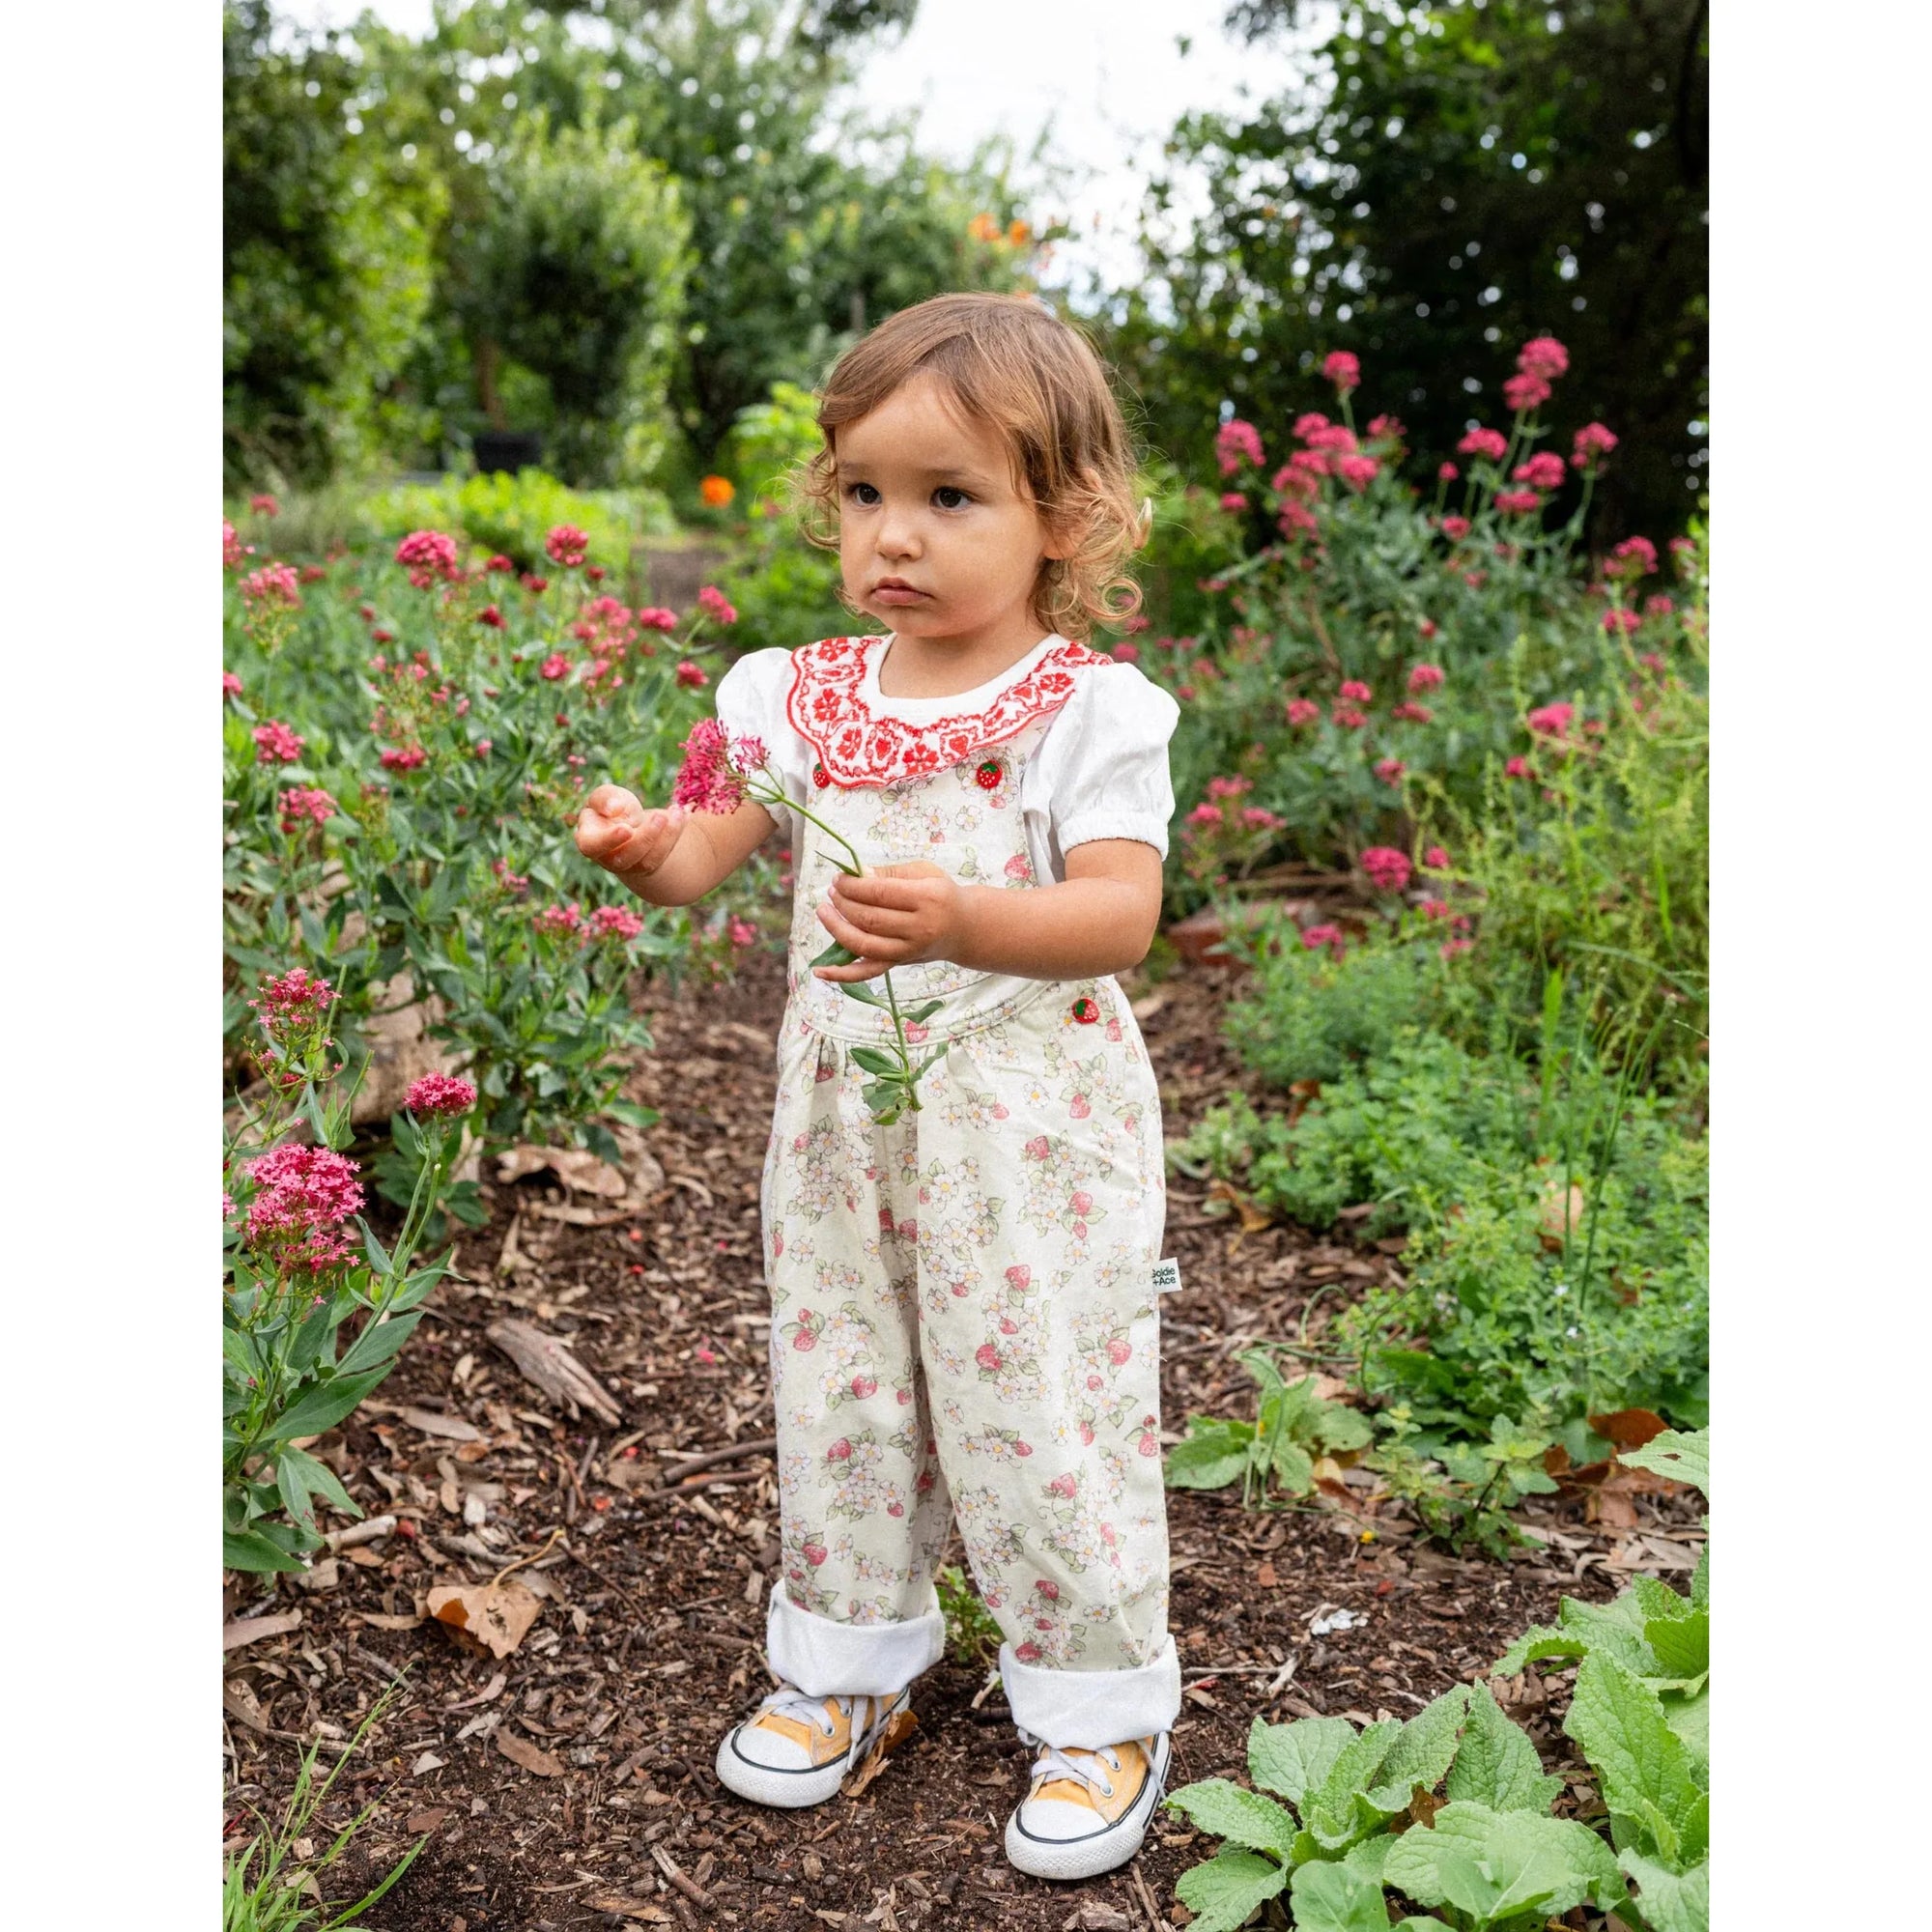 Goldie Vintage Overall Strawberry Fields